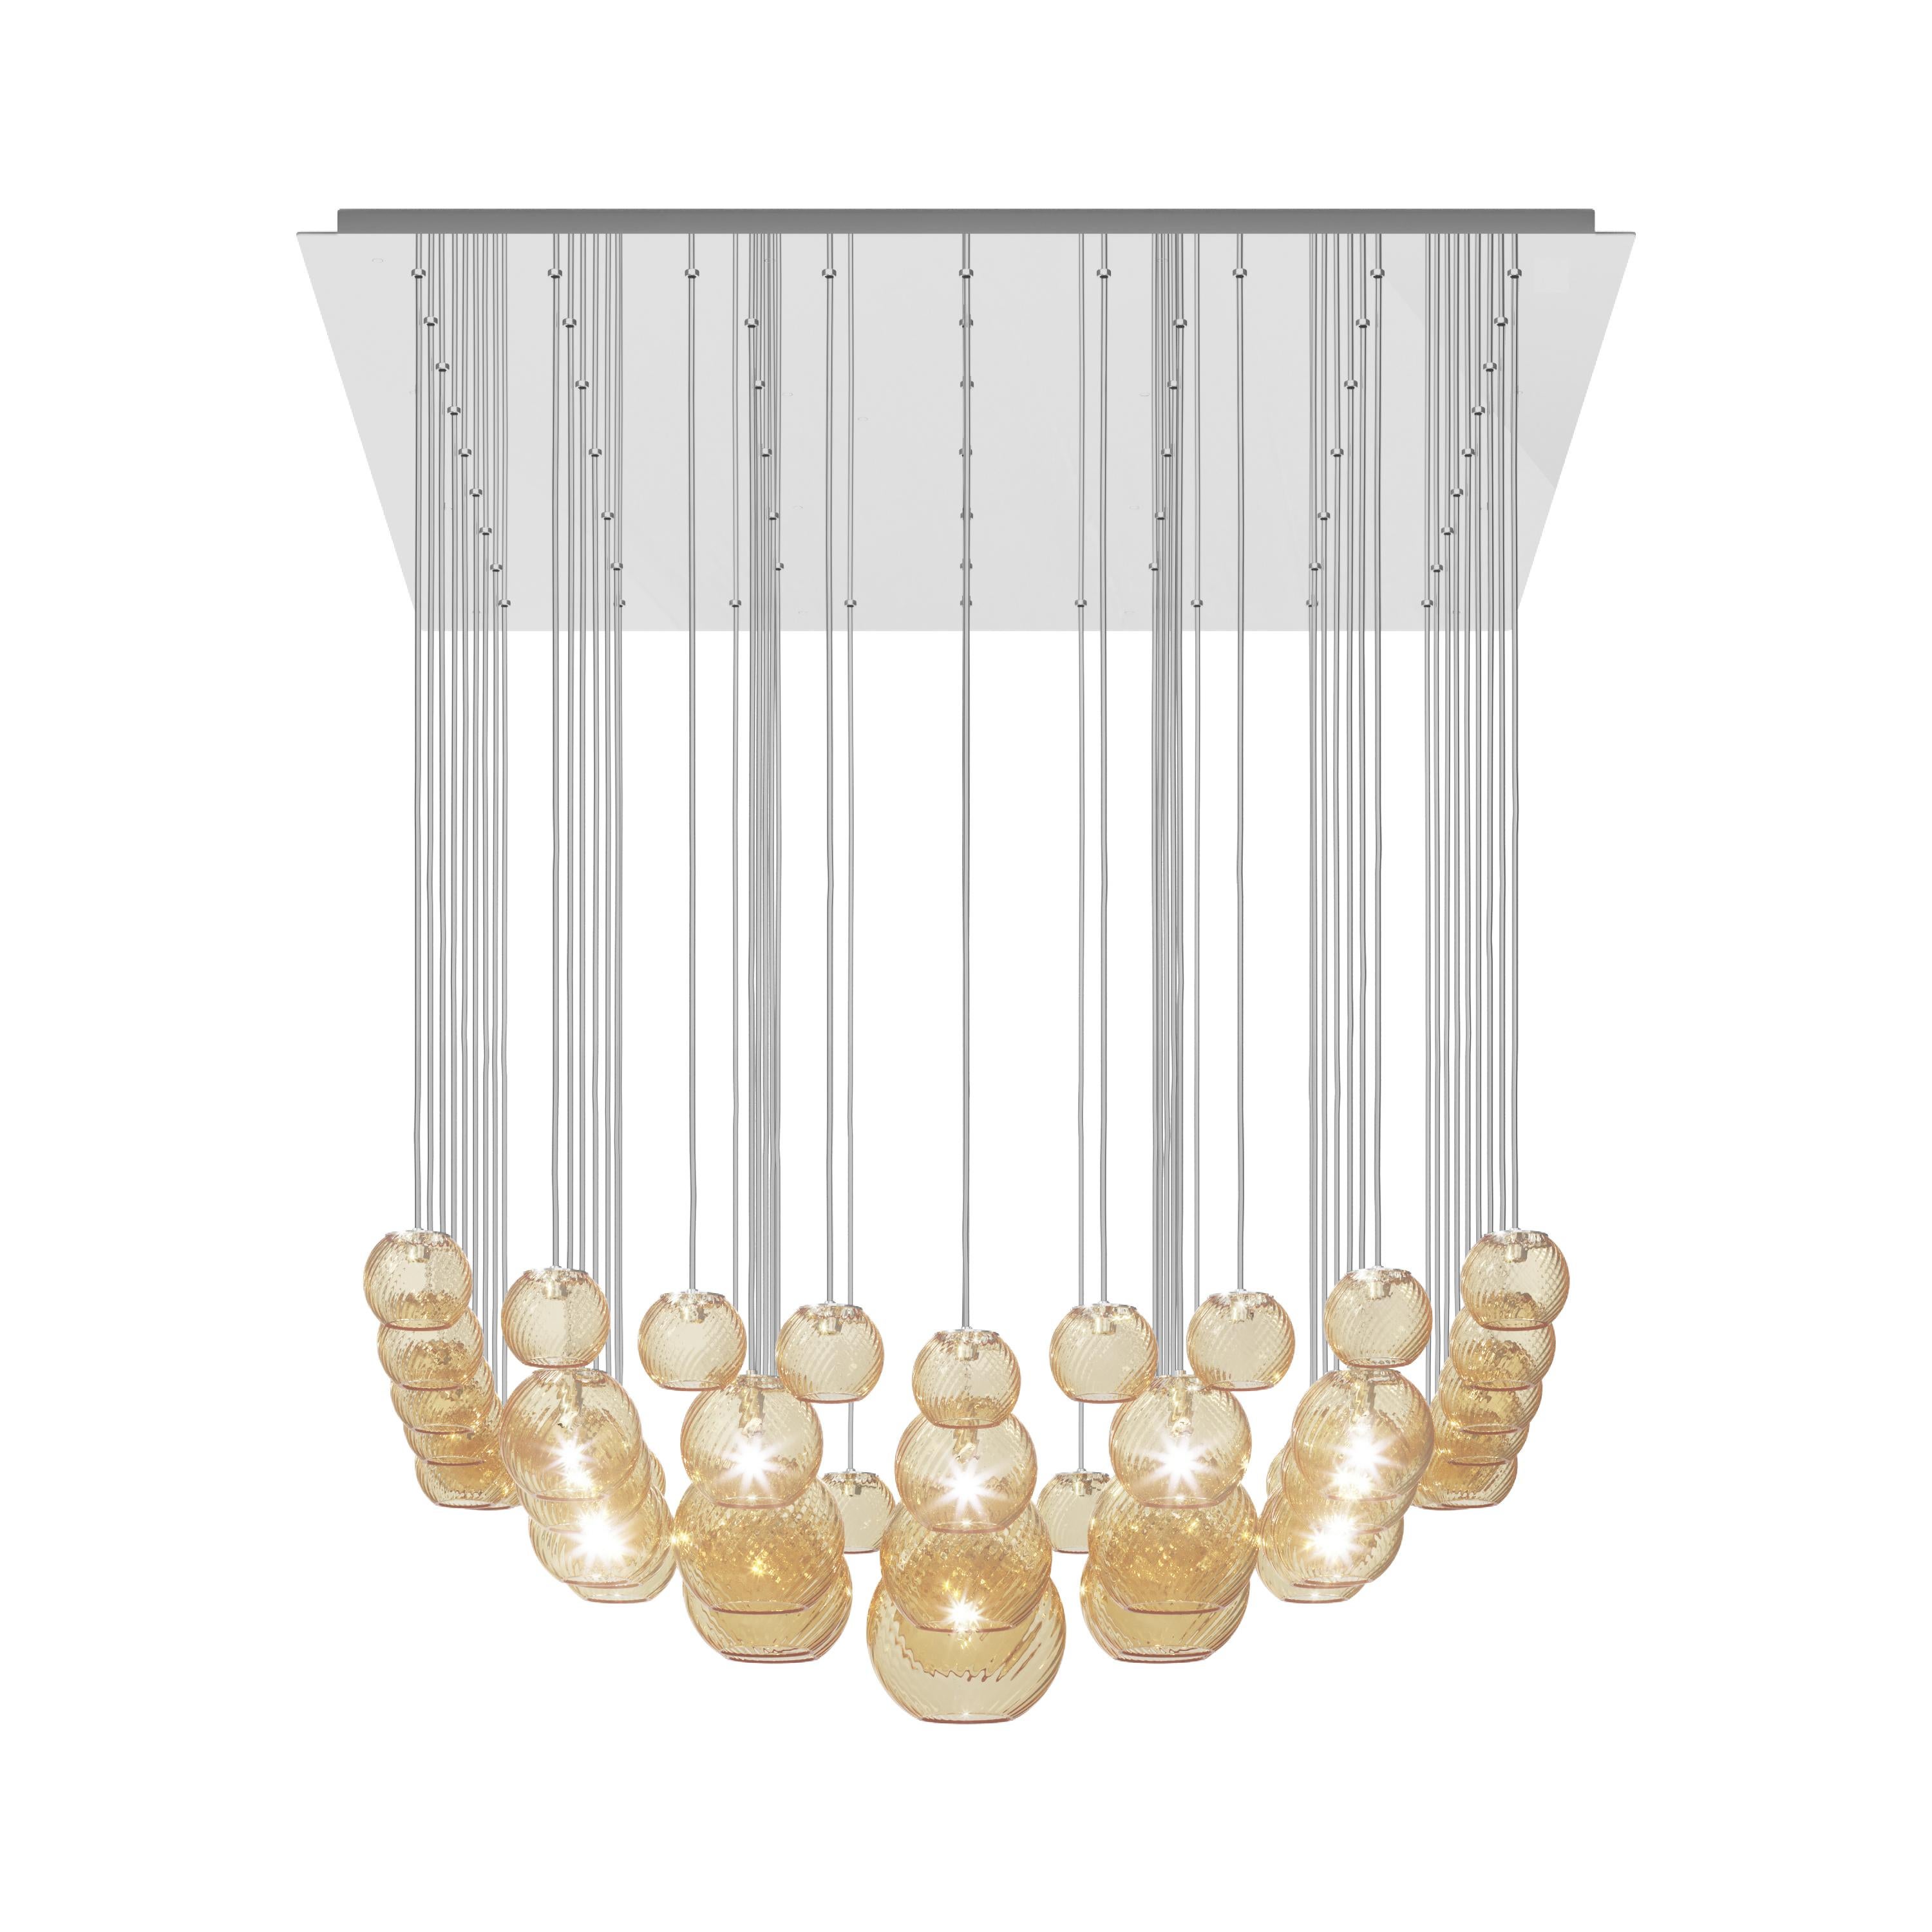 Modern Vistosi Pendant Light in Amber Striped Glass And Mirrored Steel Frame For Sale